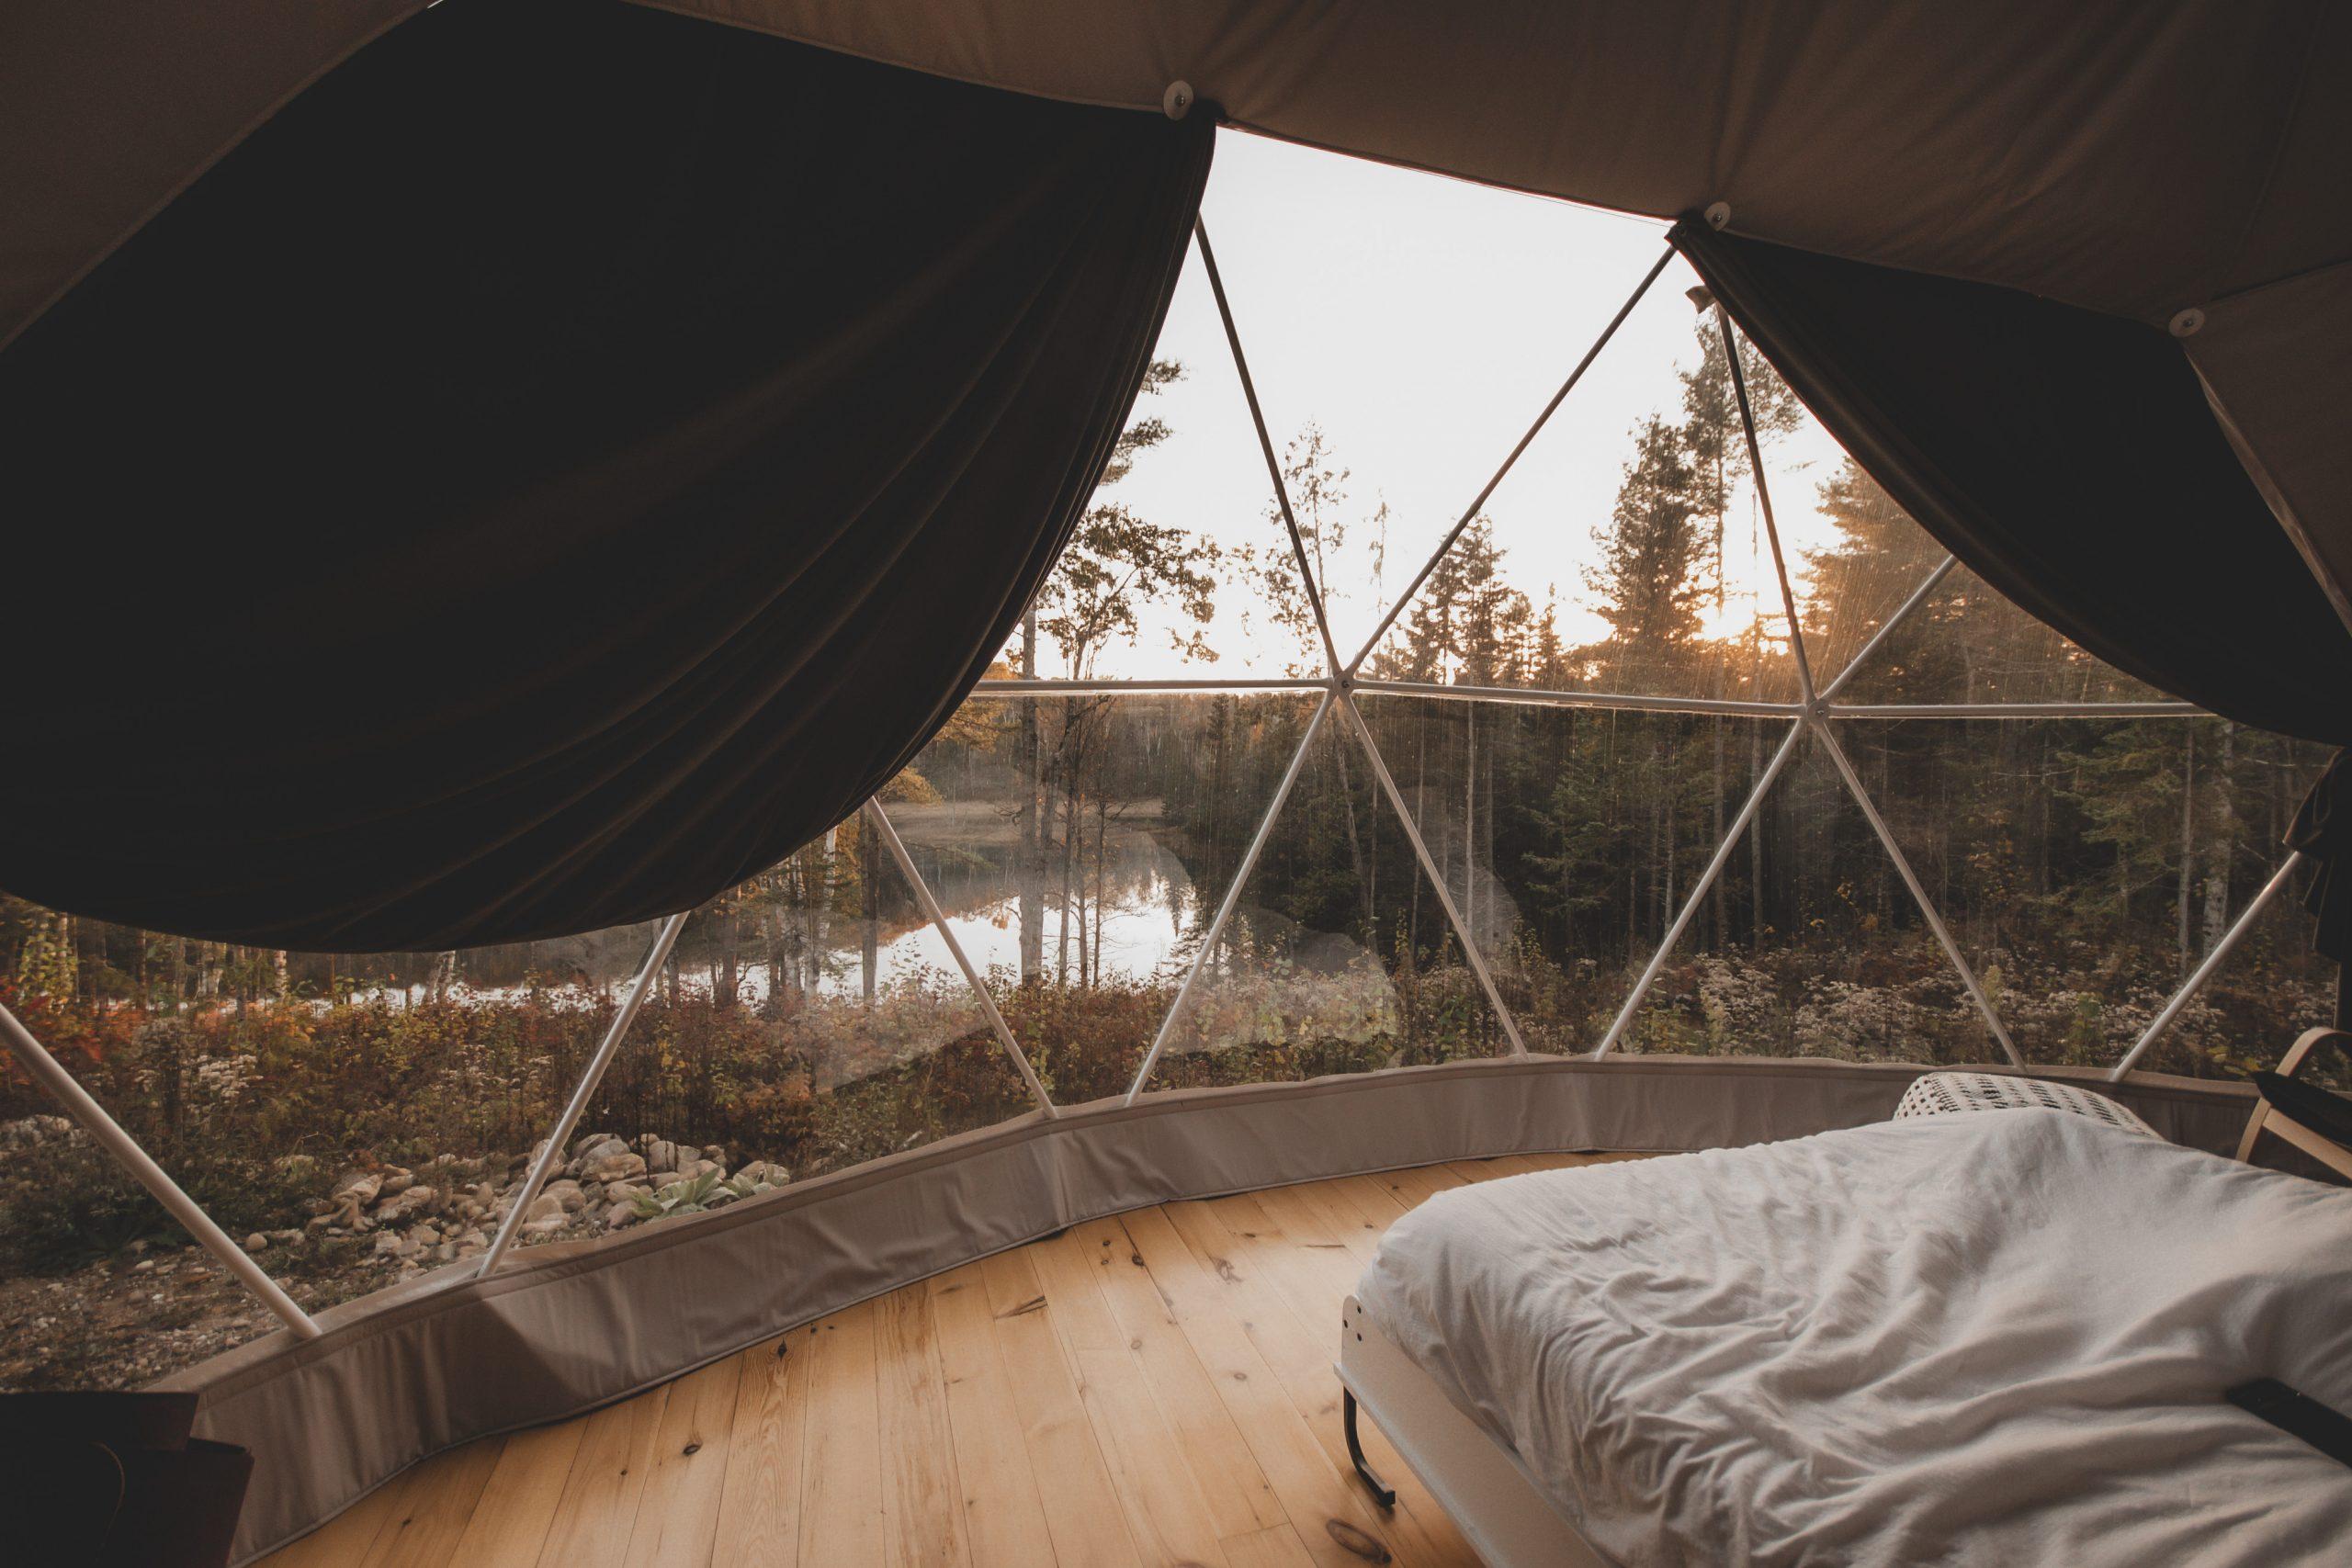 Interior of geodesic dome with view of window and bed